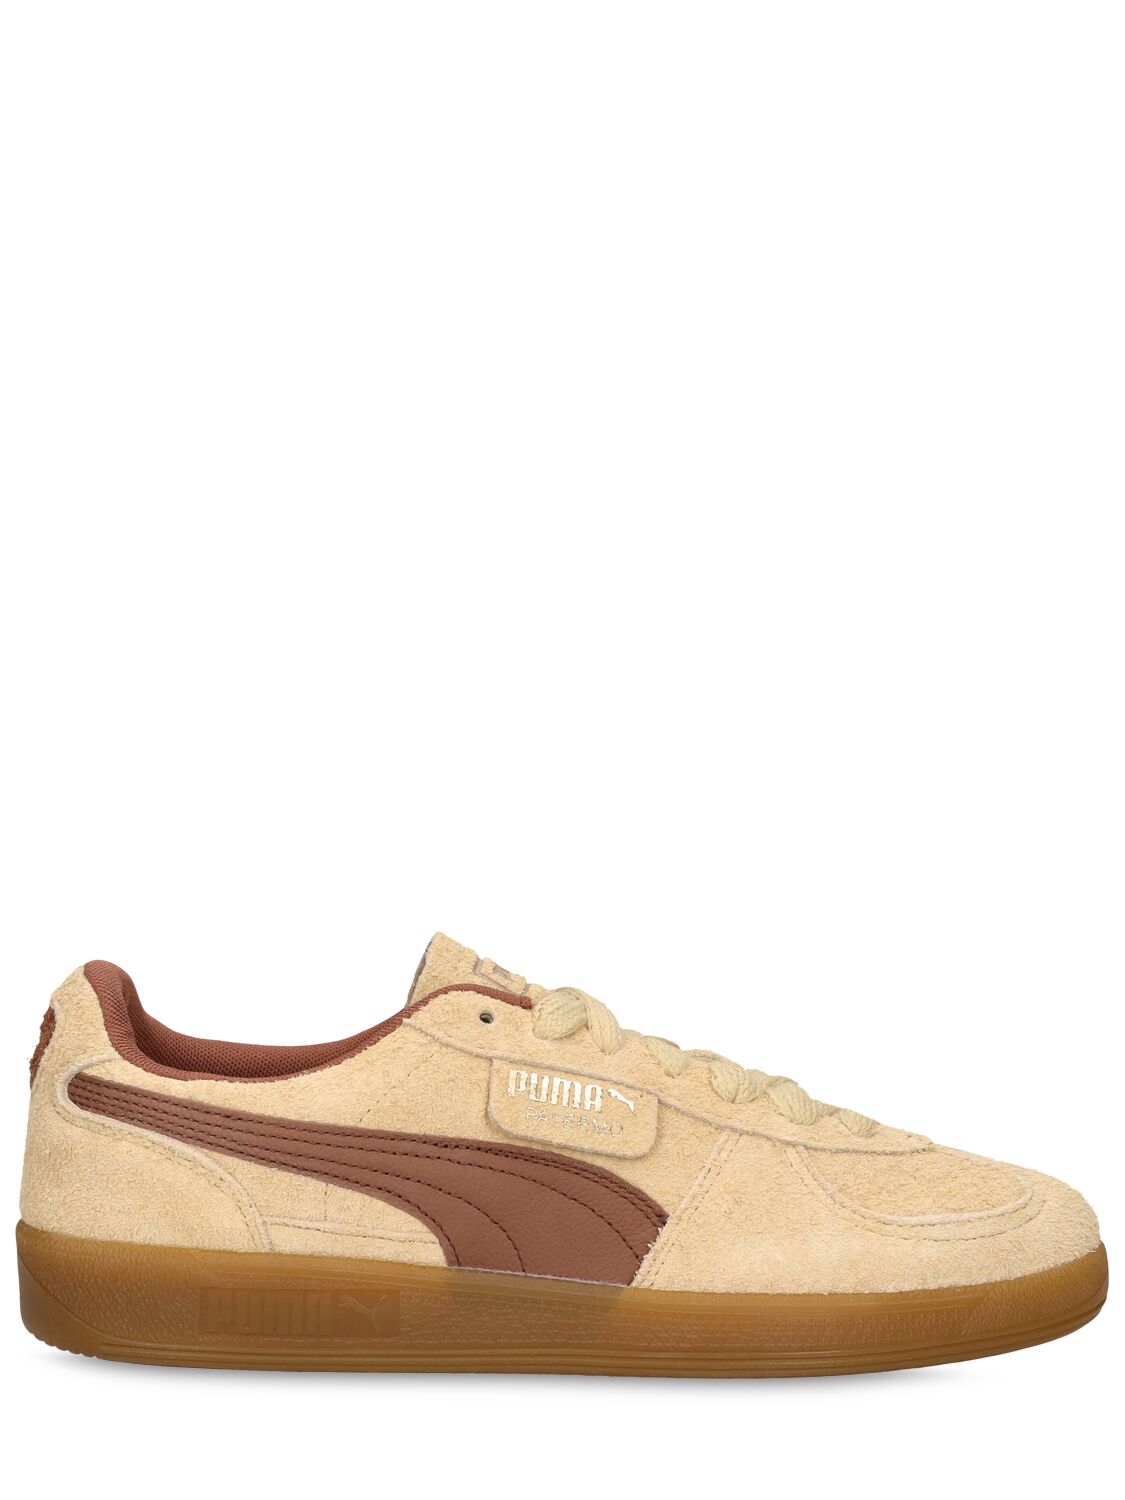 PUMA Palermo Special Pink/Green Sneakers - Farfetch